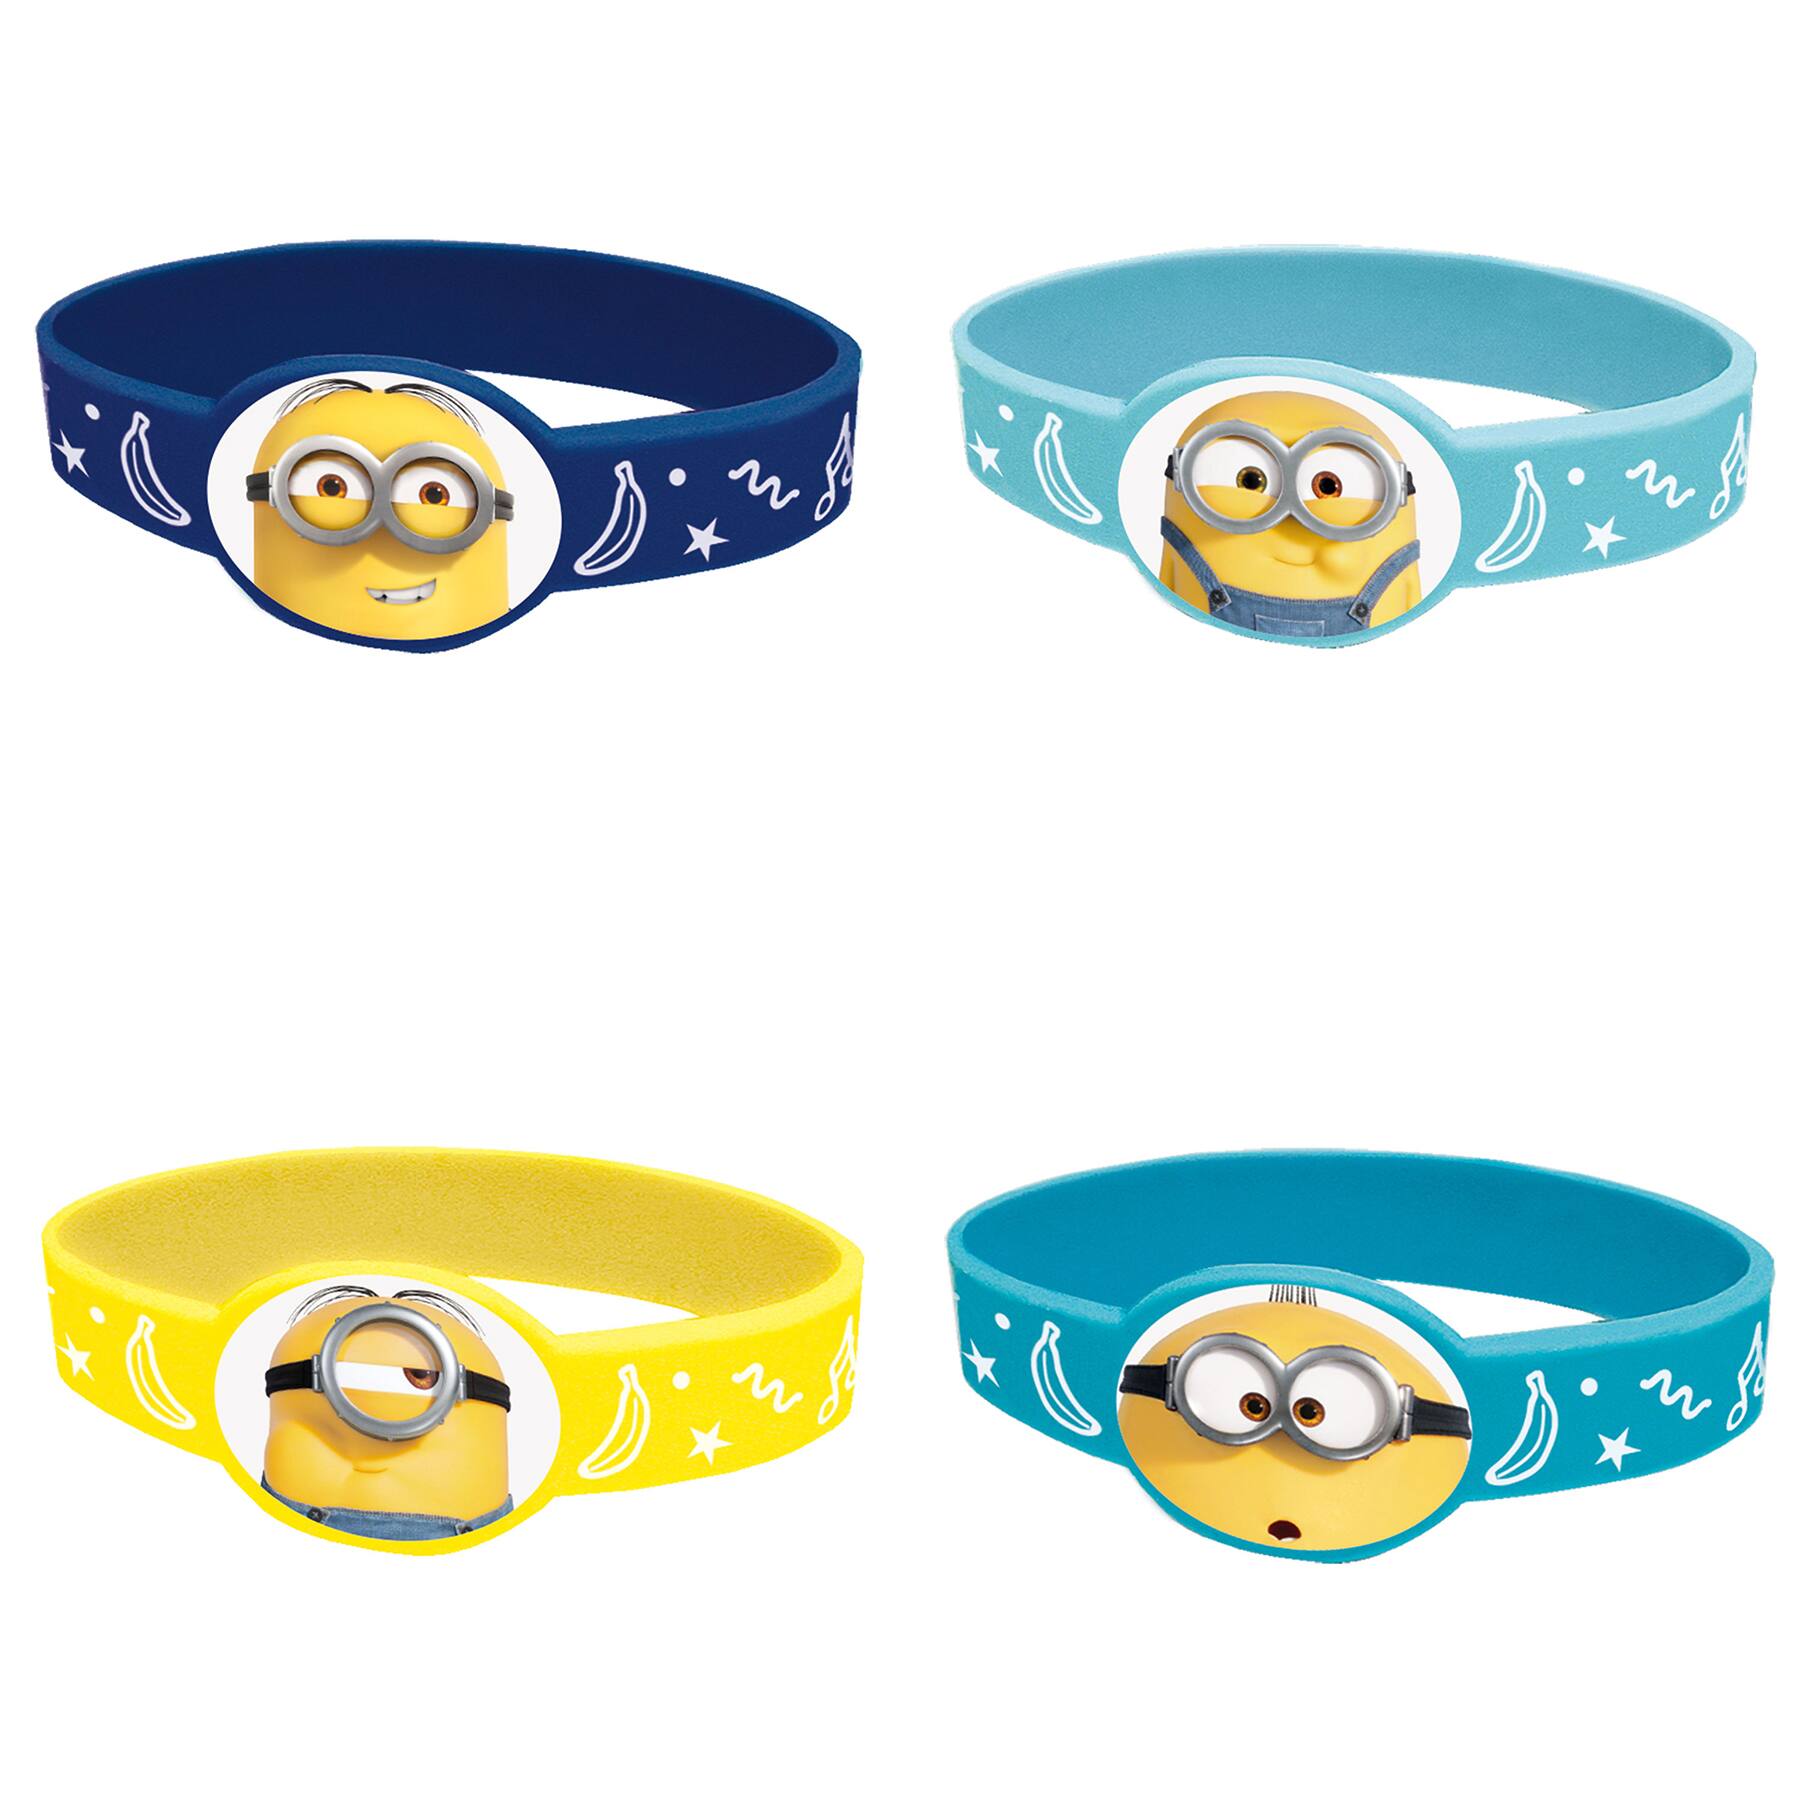 MINIONS DESPICABLE ME CHARACTER ENAMEL CHARMS SILVER BRACELET IN GIFT BAG 